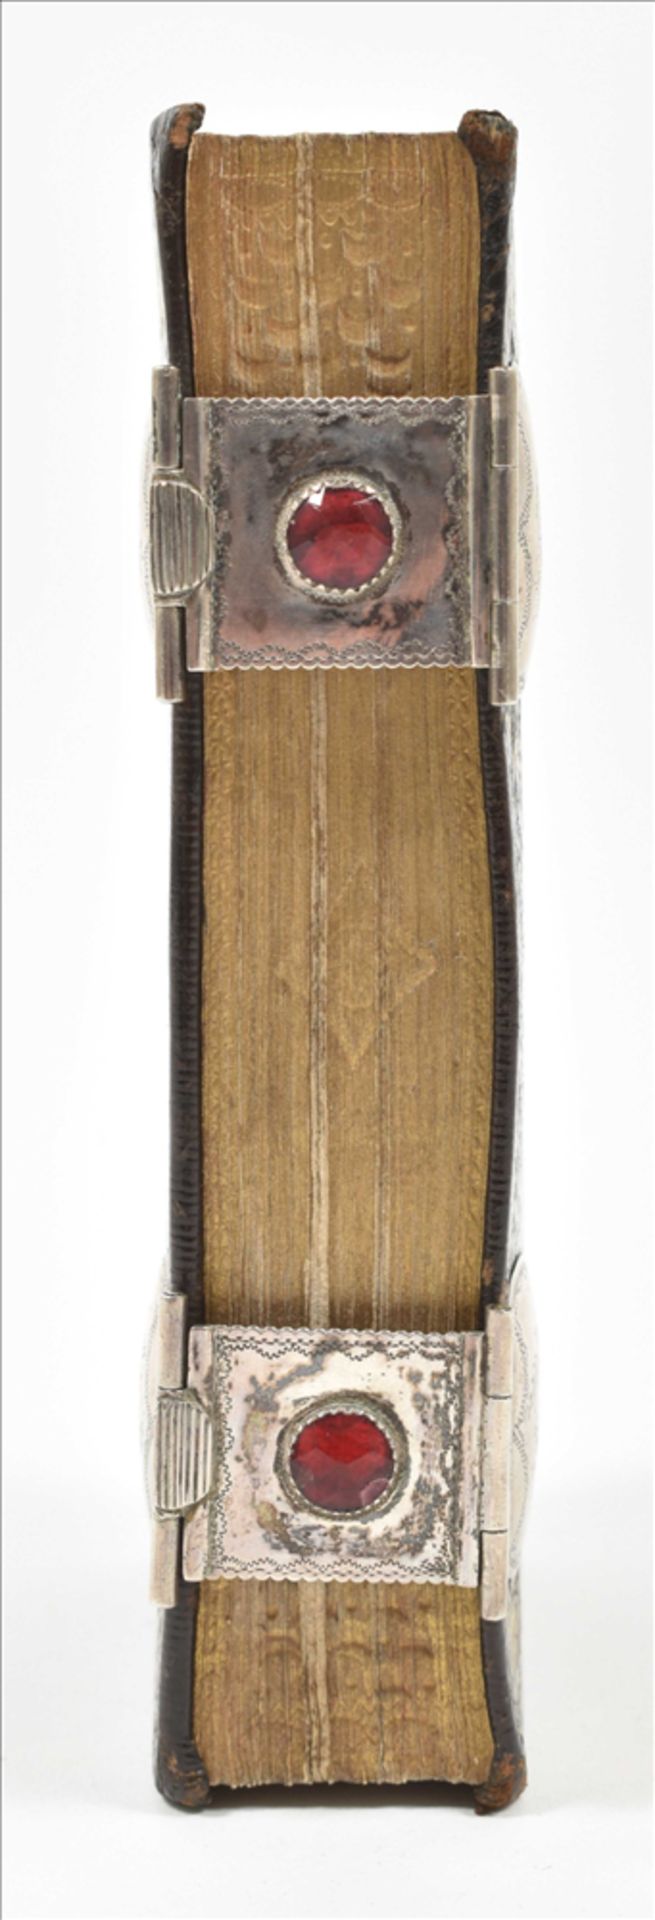 [Bindings] Early 19th century brown leather binding with two silver clasps and catches - Image 7 of 10